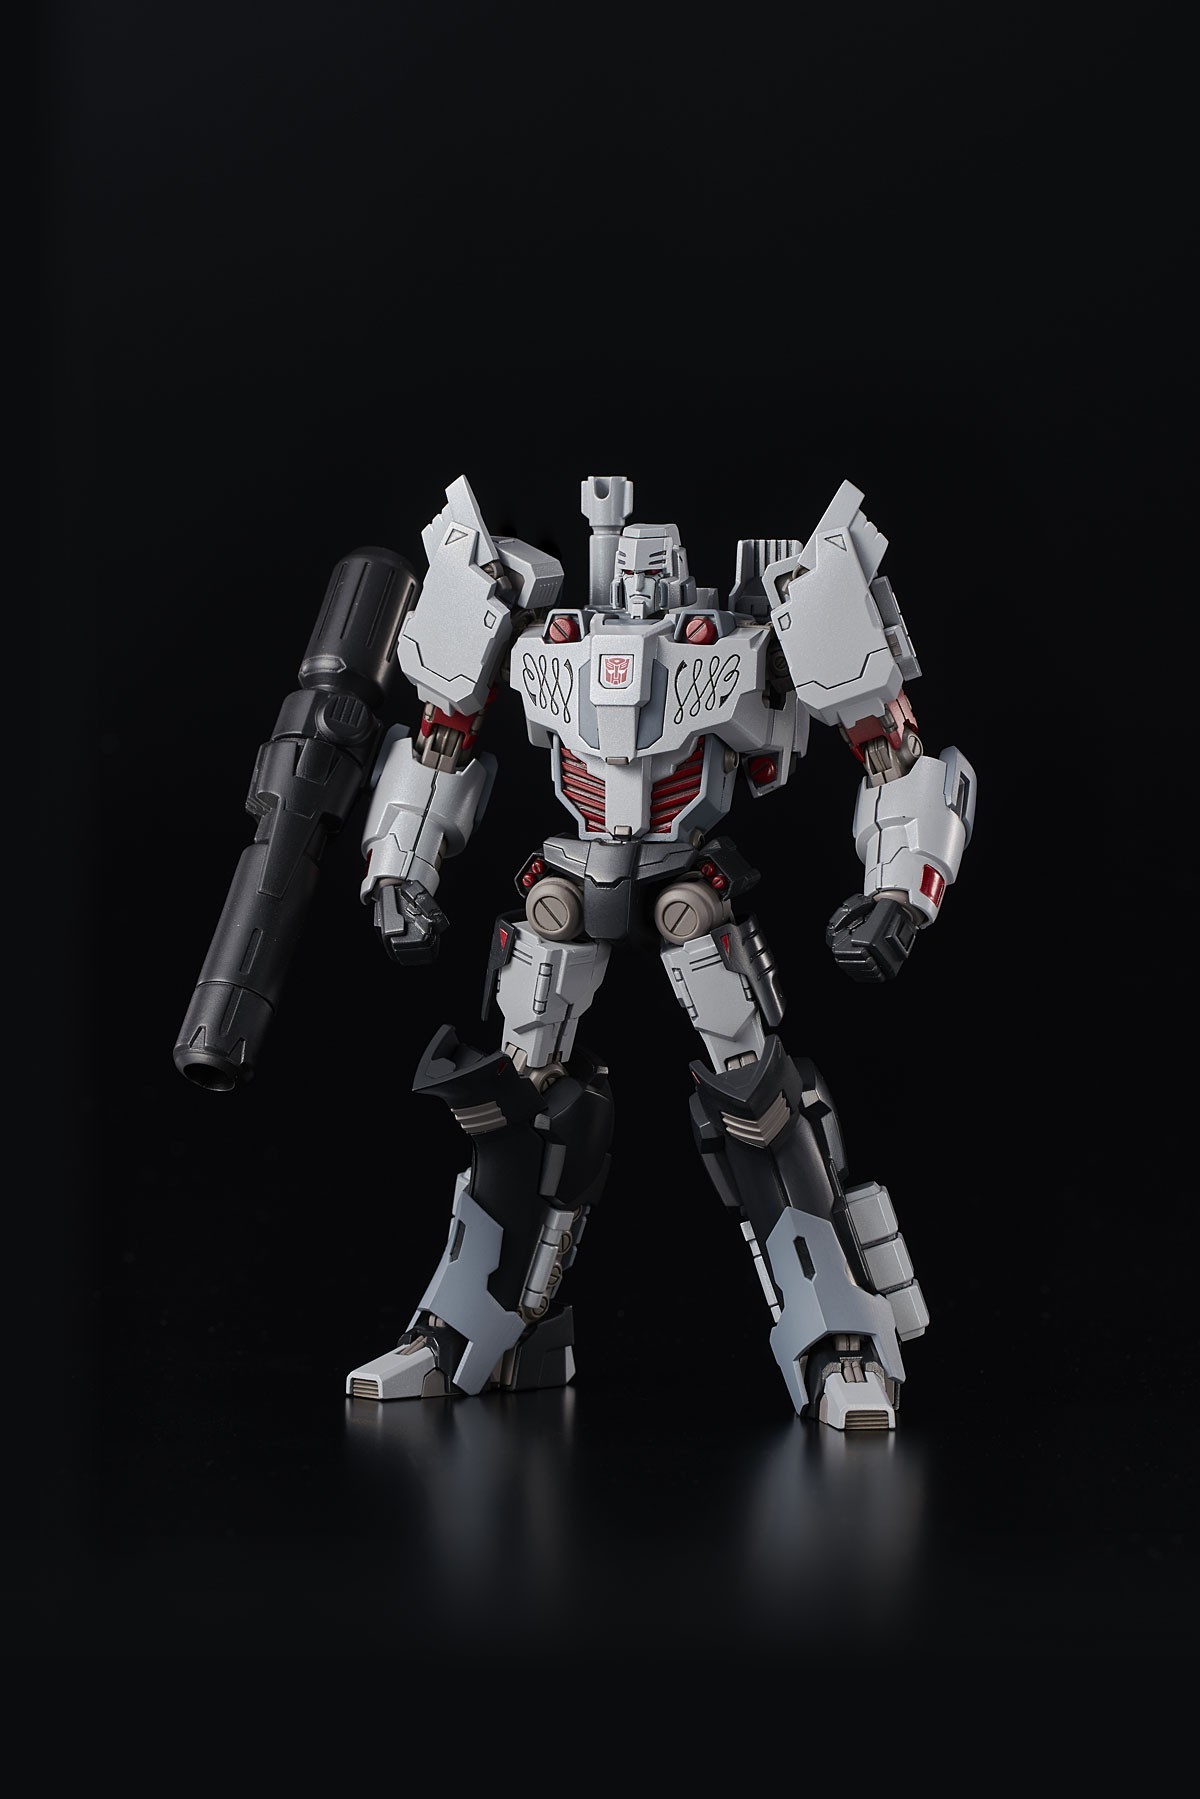 Transformers News: New Images of Flame Toys Furai Model IDW Autobot Version Megatron With Packaging